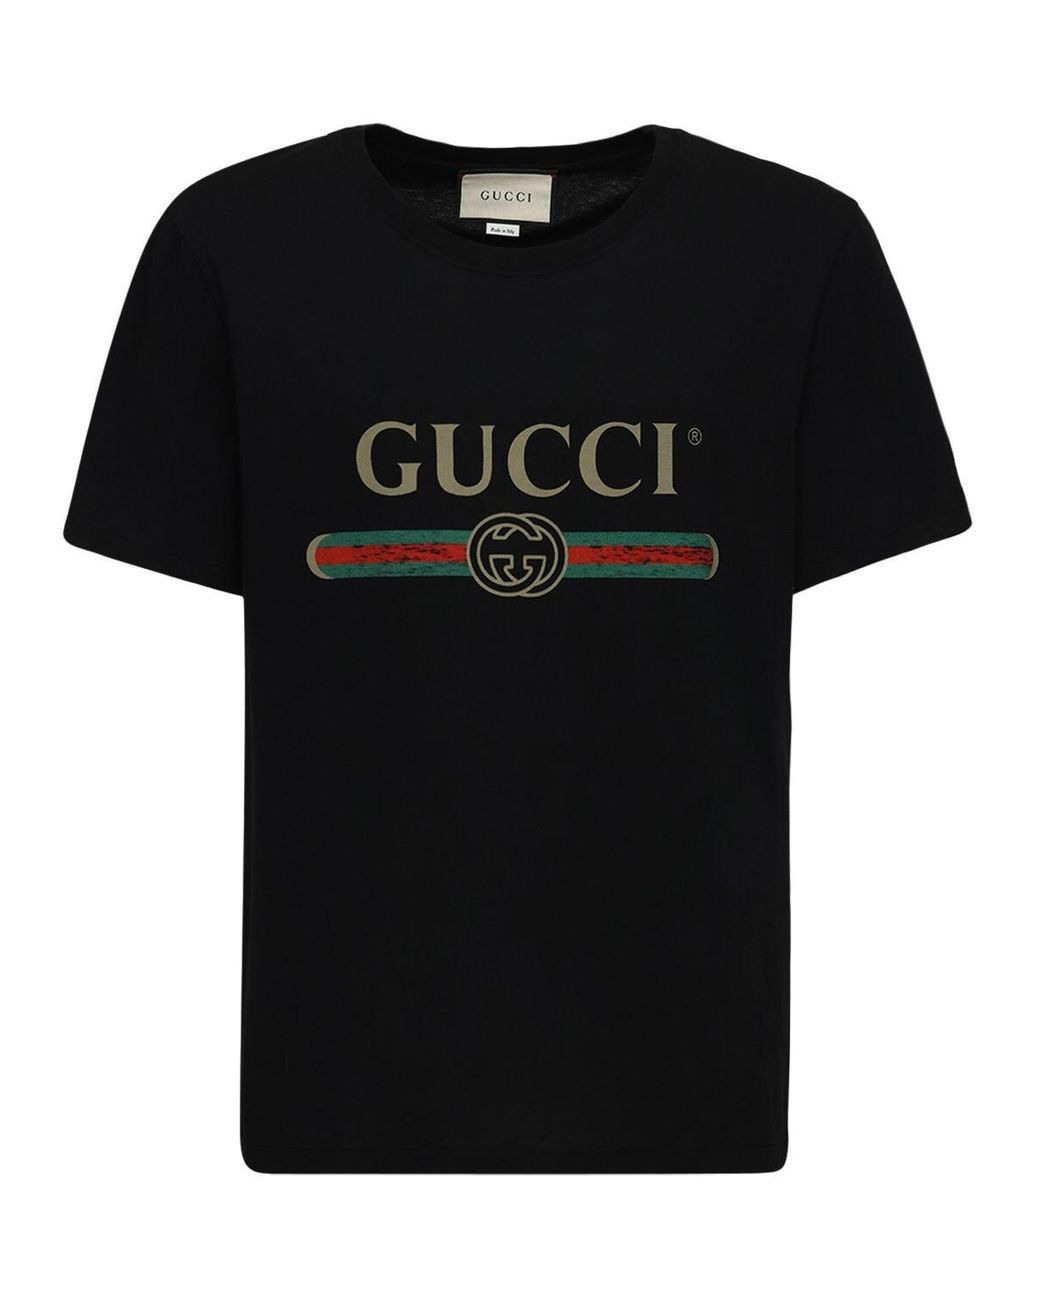 Gucci Cotton Distressed Fake Logo T Shirt in Black for Men - Save 25% ...